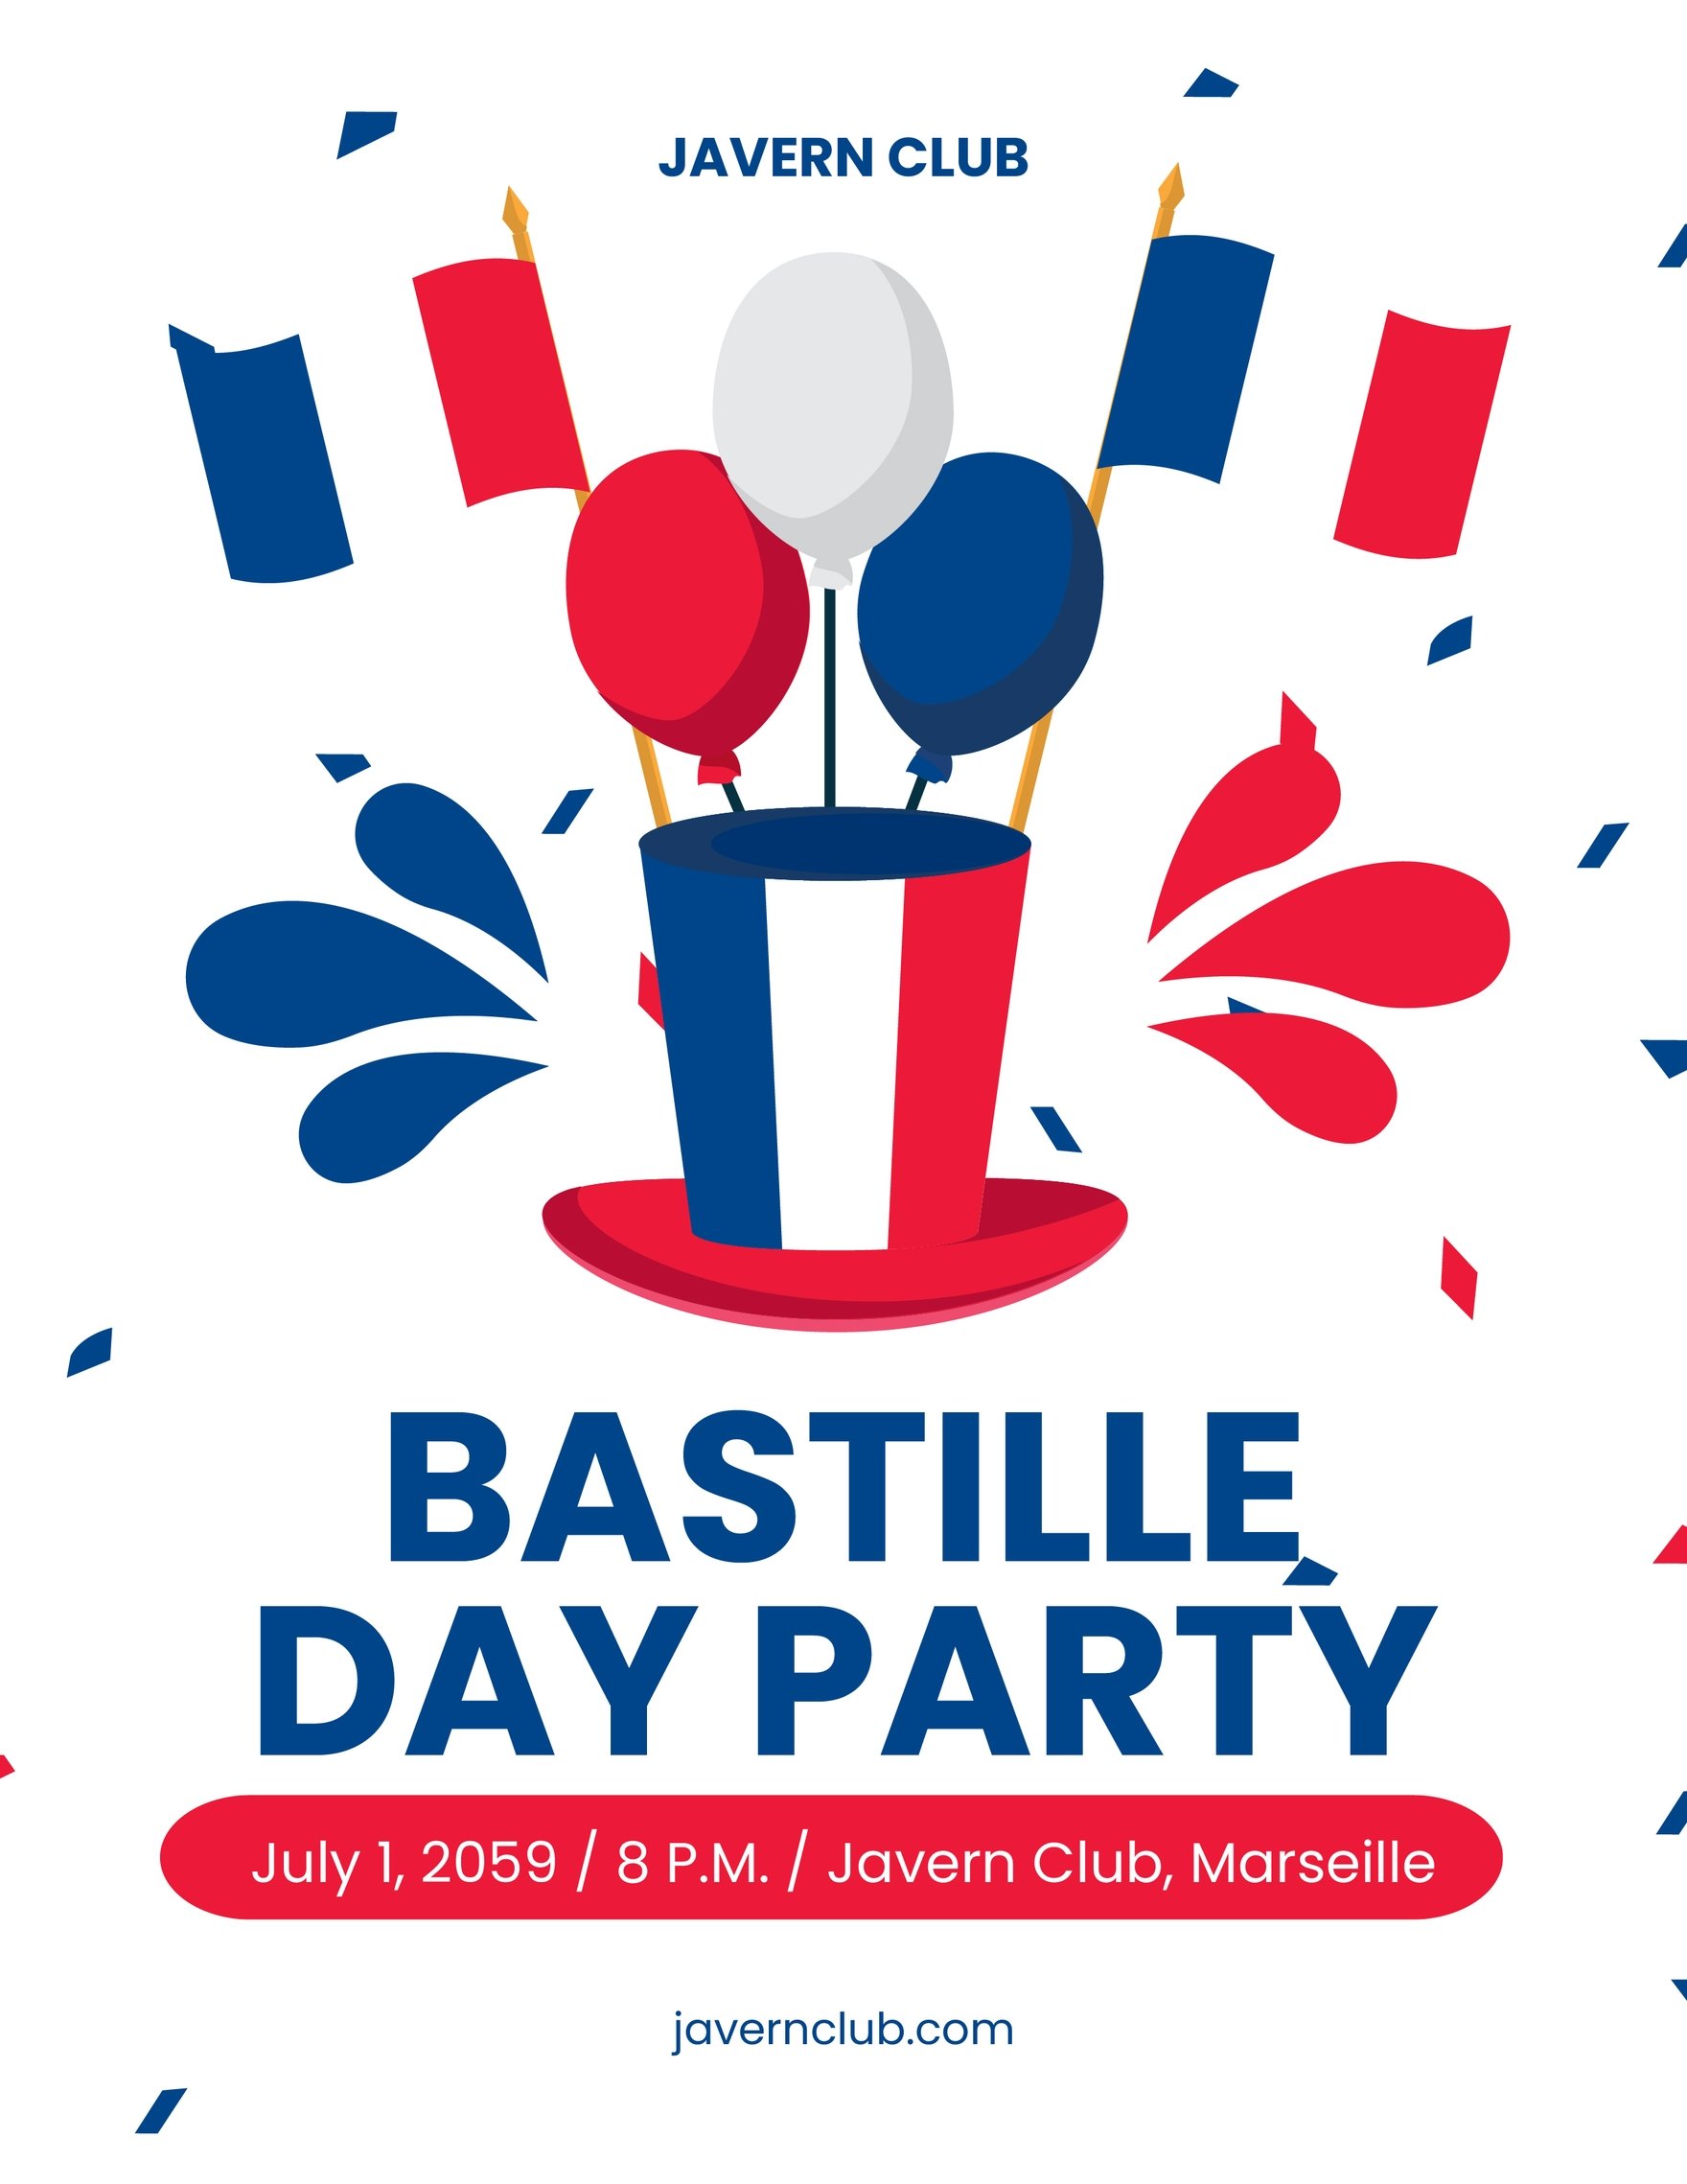 Free Bastille Day Party Flyer in Word, Google Docs, Illustrator, PSD, Apple Pages, Publisher